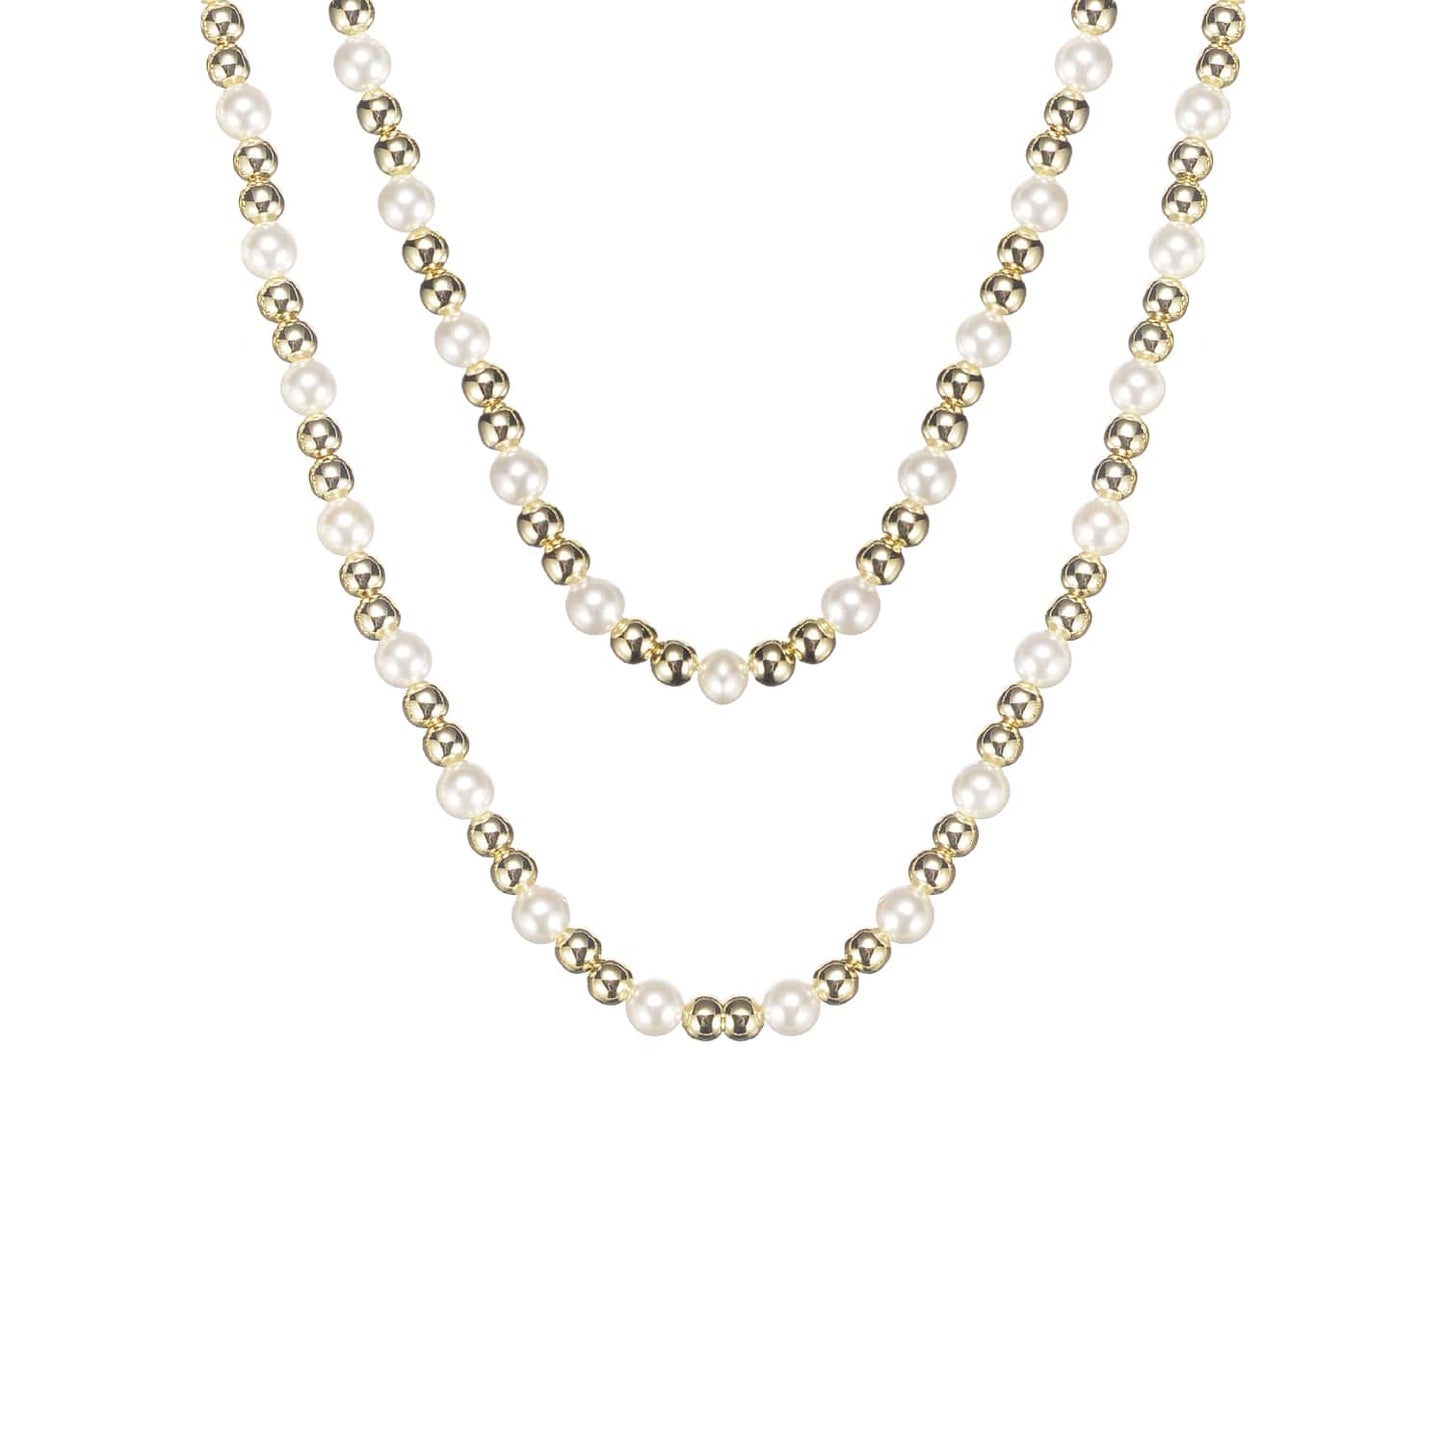 Natalie Wood -Adorned Pearl Beaded Necklace in Gold